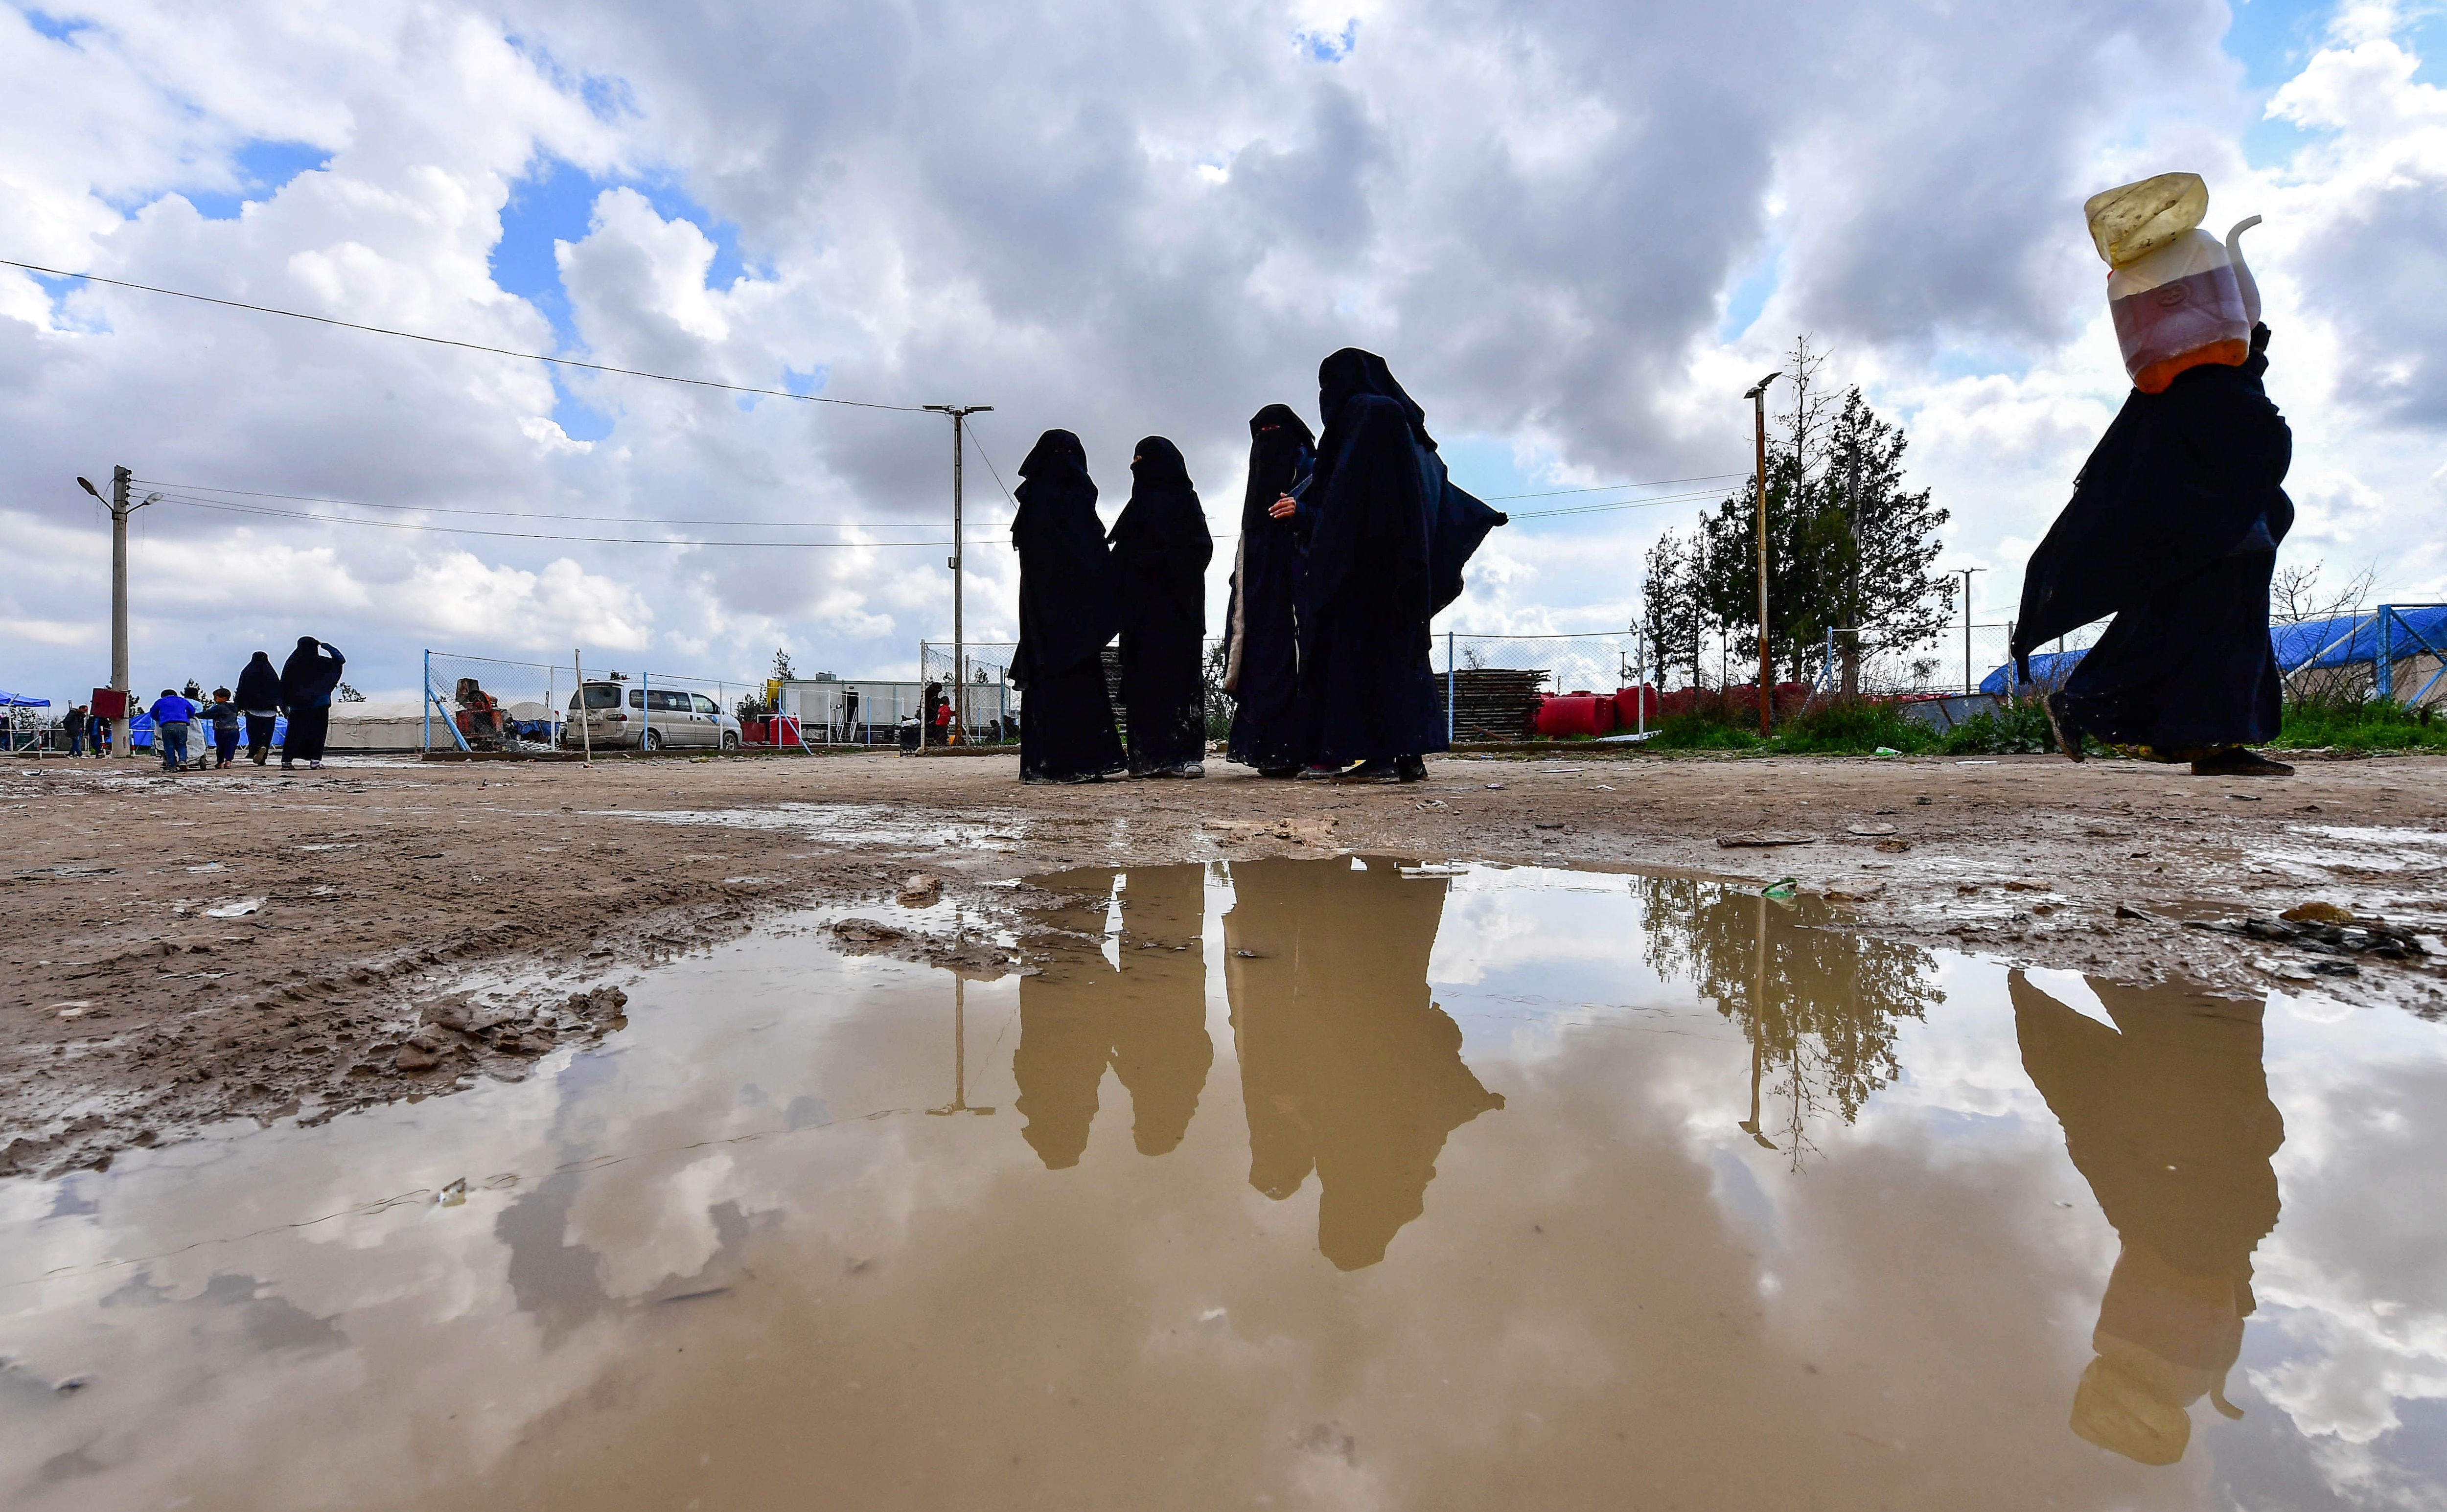 Women living inside Al-Hawl camp which houses relatives of Islamic State group members, walk inside the site in al-Hasakeh governorate in northeastern Syria.